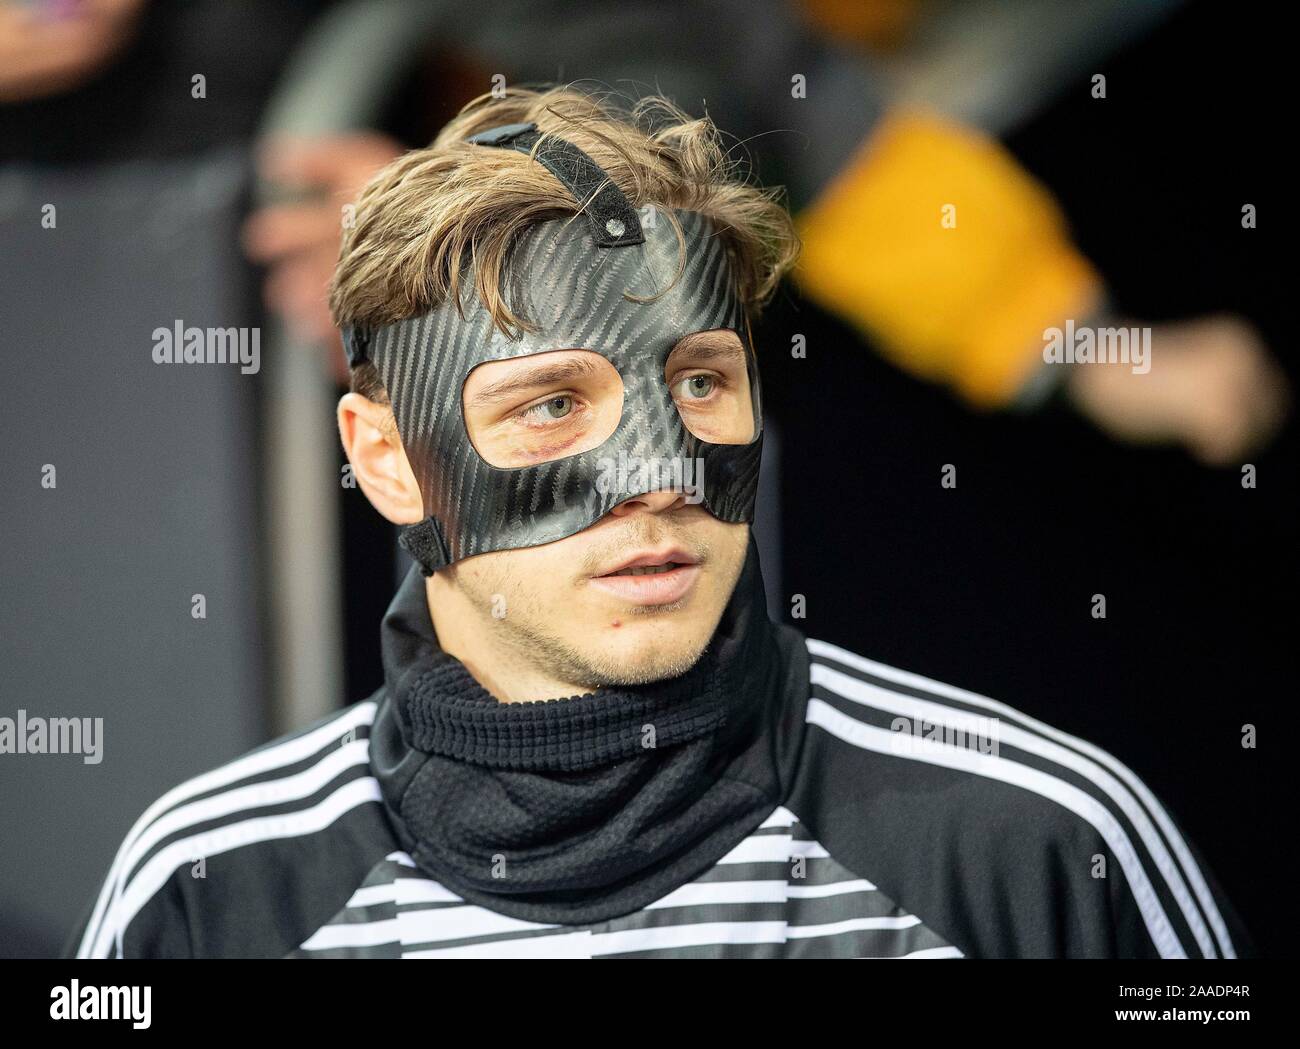 Niklas STARK (GER) with Mask, Face Mask, Soccer Laenderspiel, EURO  Qualification, Group C 9. matchday, Germany (GER) - Belarus (BLR) 4: 0,  16/11/2019 in Borussia Monchengladbach/Germany. ¬ | usage worldwide Stock  Photo - Alamy